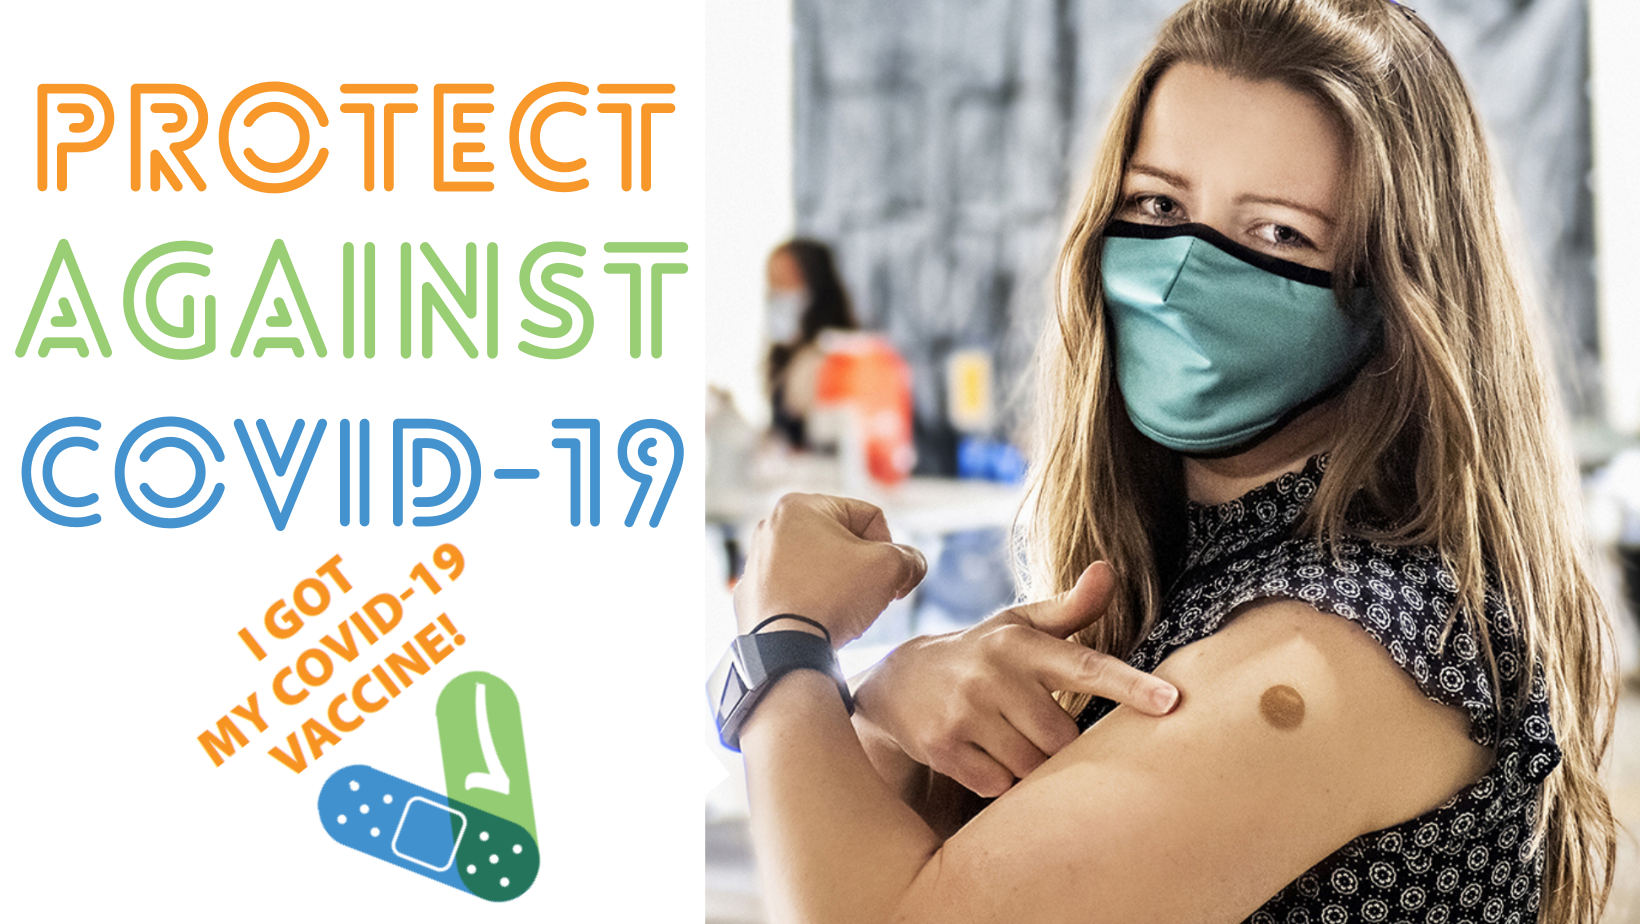 Protect Against COVID-19 – Get Vaccinated